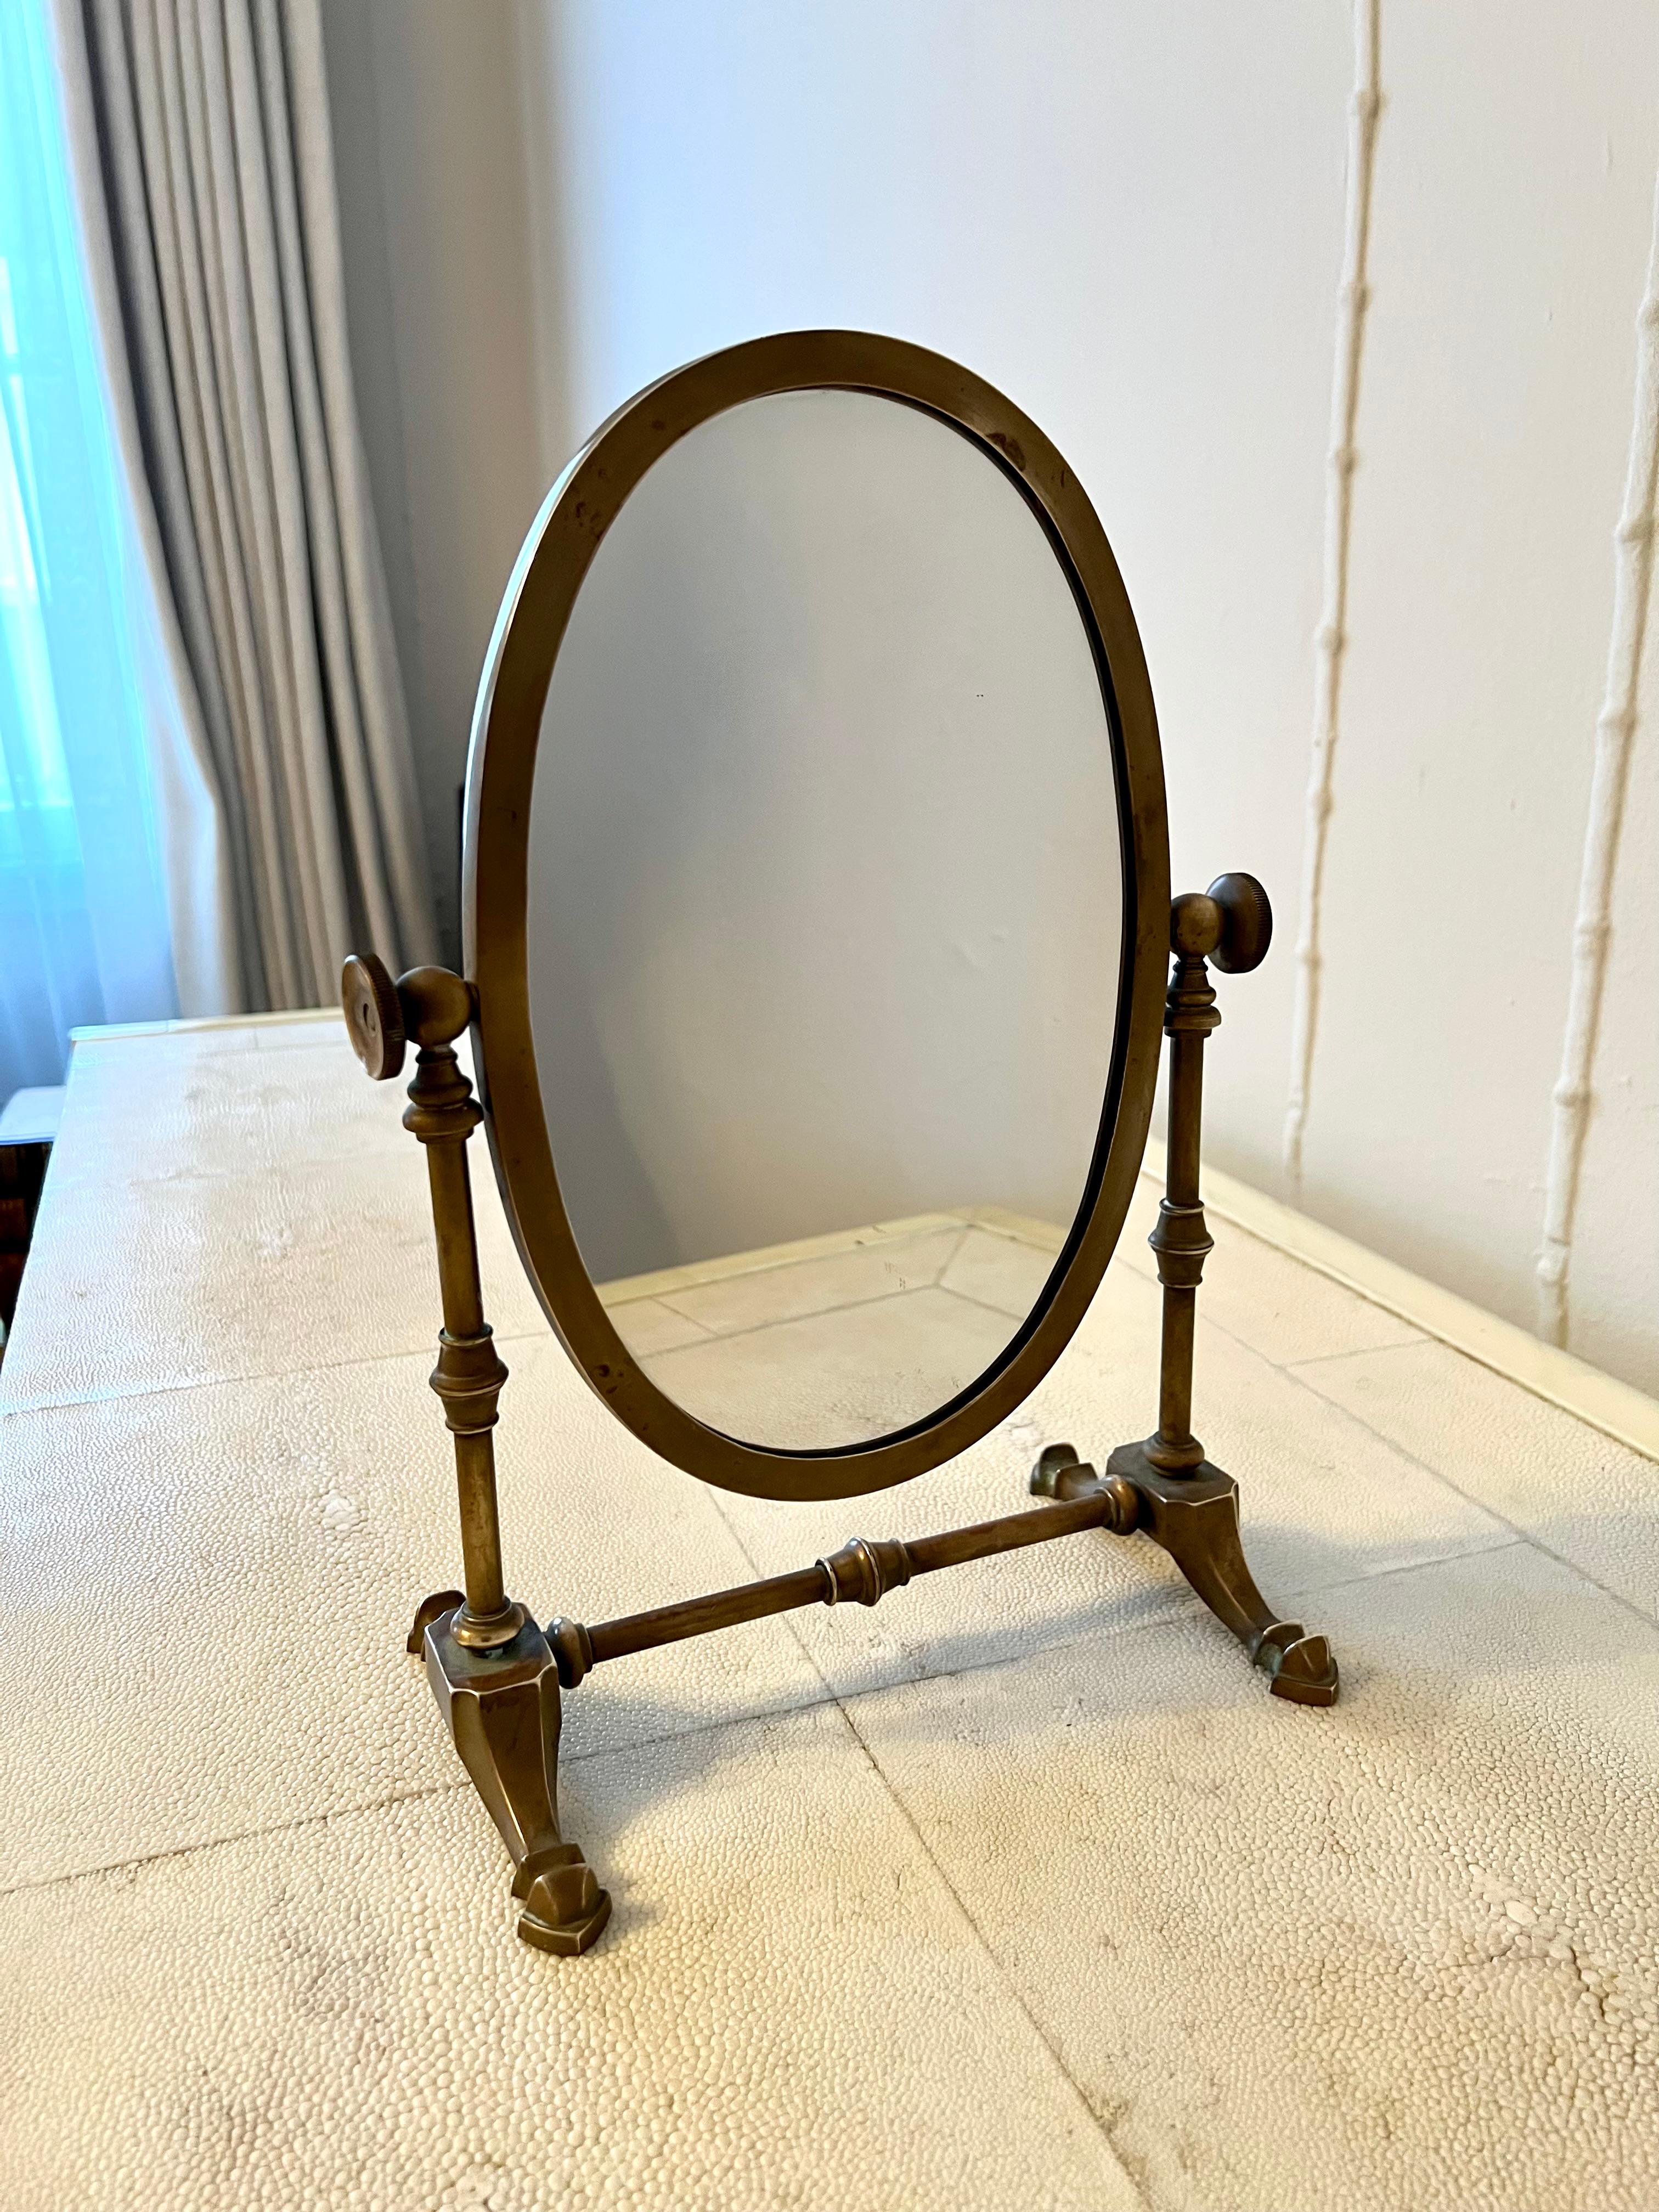 Vintage table or shaving mirror with charming patination. An oval mirror on the front, a felted back. Catches light beautifully on any table, particularly suited for the vanity or atop the dresser. A compliment to the vanity, dressing area.

Or